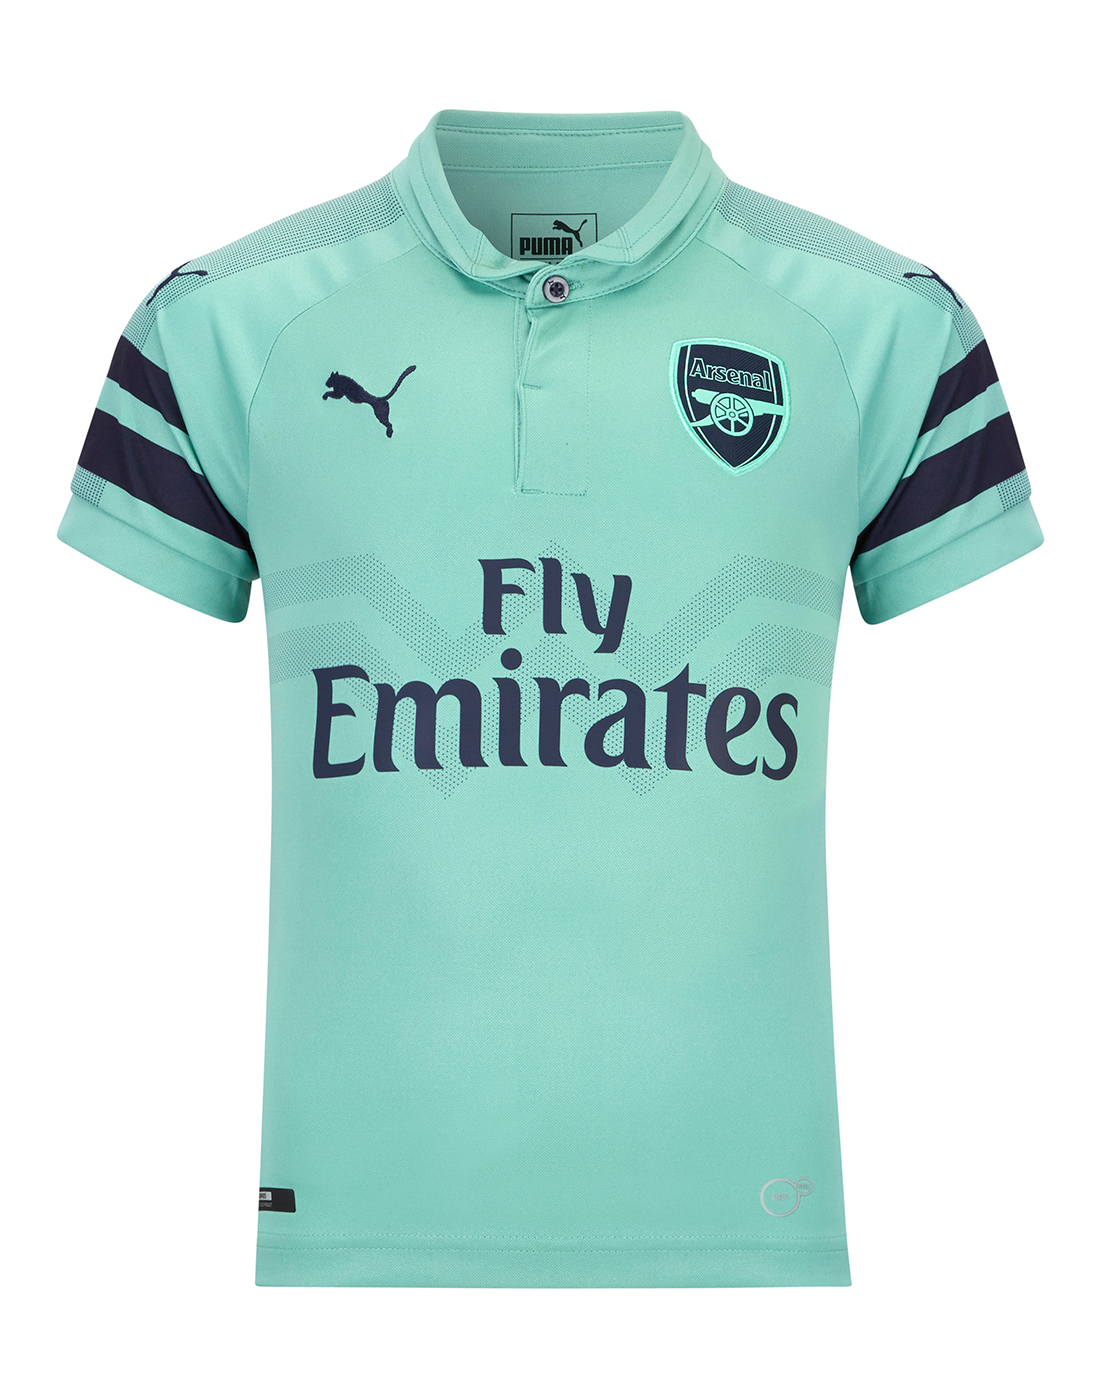 18/19 Jersey - Green | Life Style Sports IE